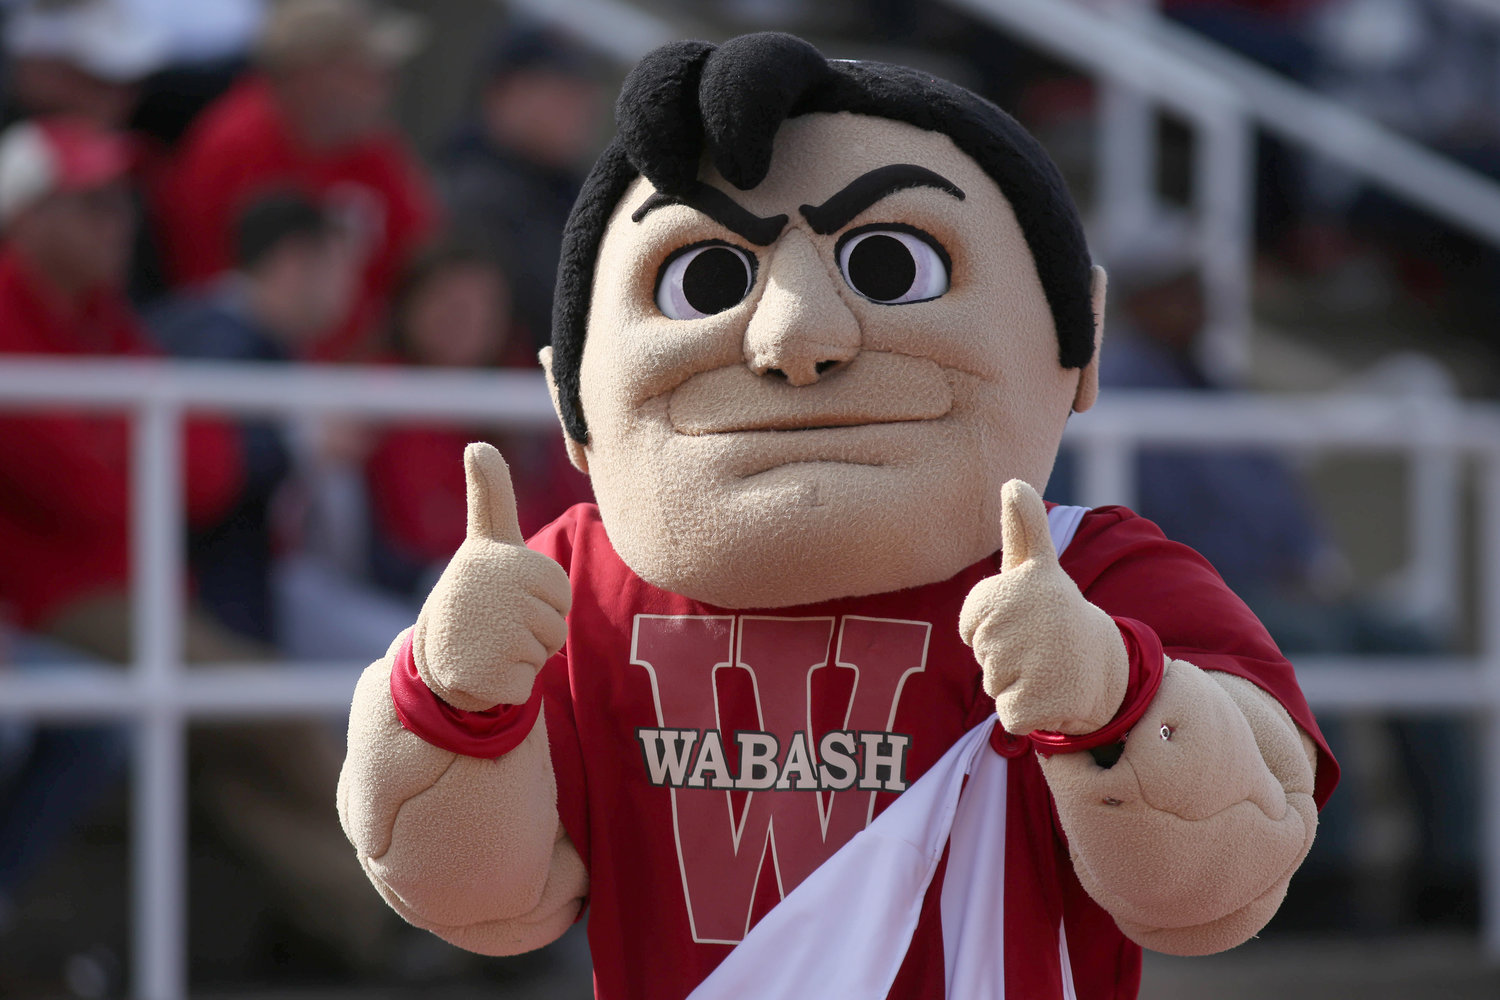 U.S. News also honored Wabash as an A+ School for B Students, an institution “where spirit and hard work could make all the difference to admissions,” according to the publication’s criteria.